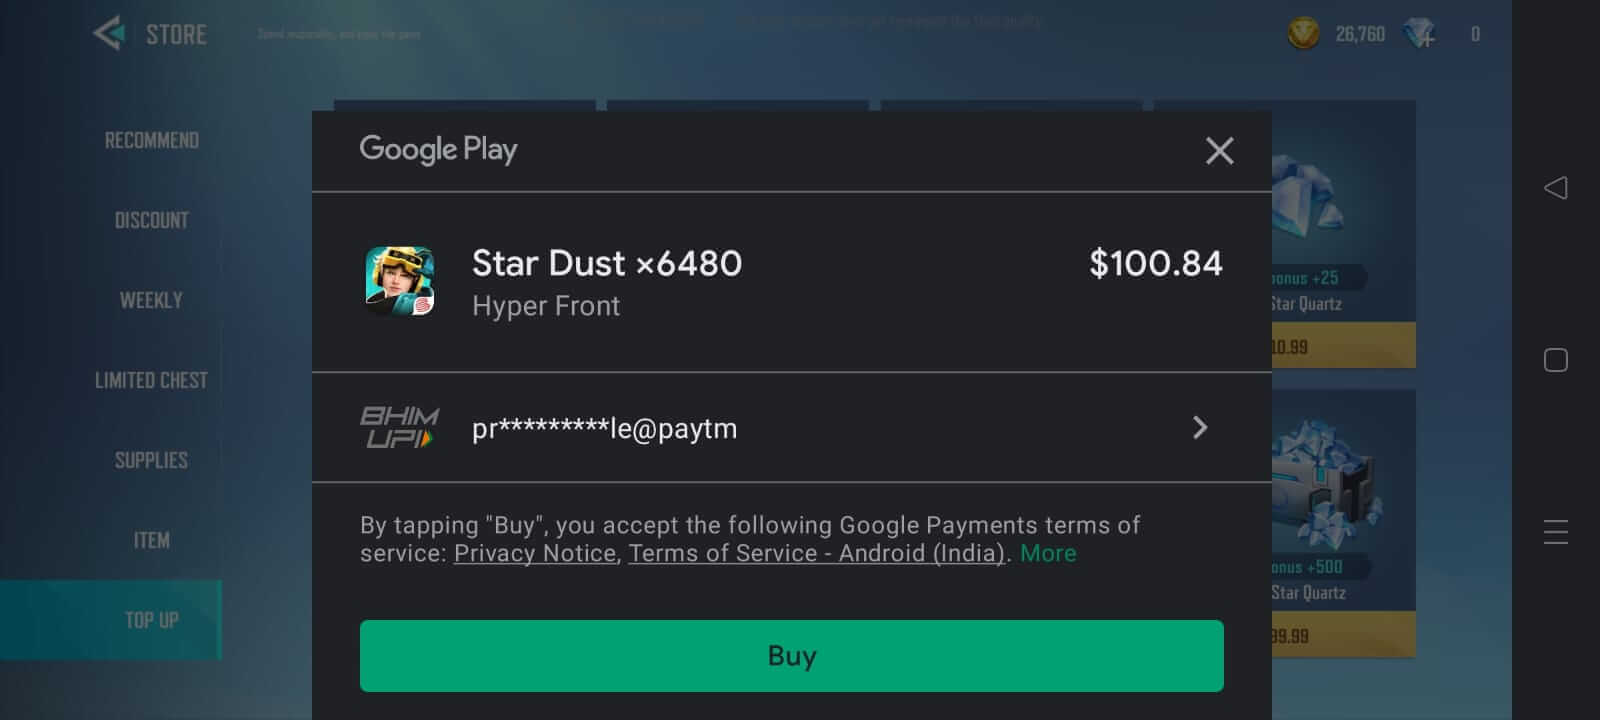 Get star quartz & Permanent gun skins for free in hyper front 100% Working! Hello Gamers!! Today I'm going to show you how you can get free stars quartz and Permanent Gun Skins in hyper front.You just have to tag along with the instructions and do simple tasks.